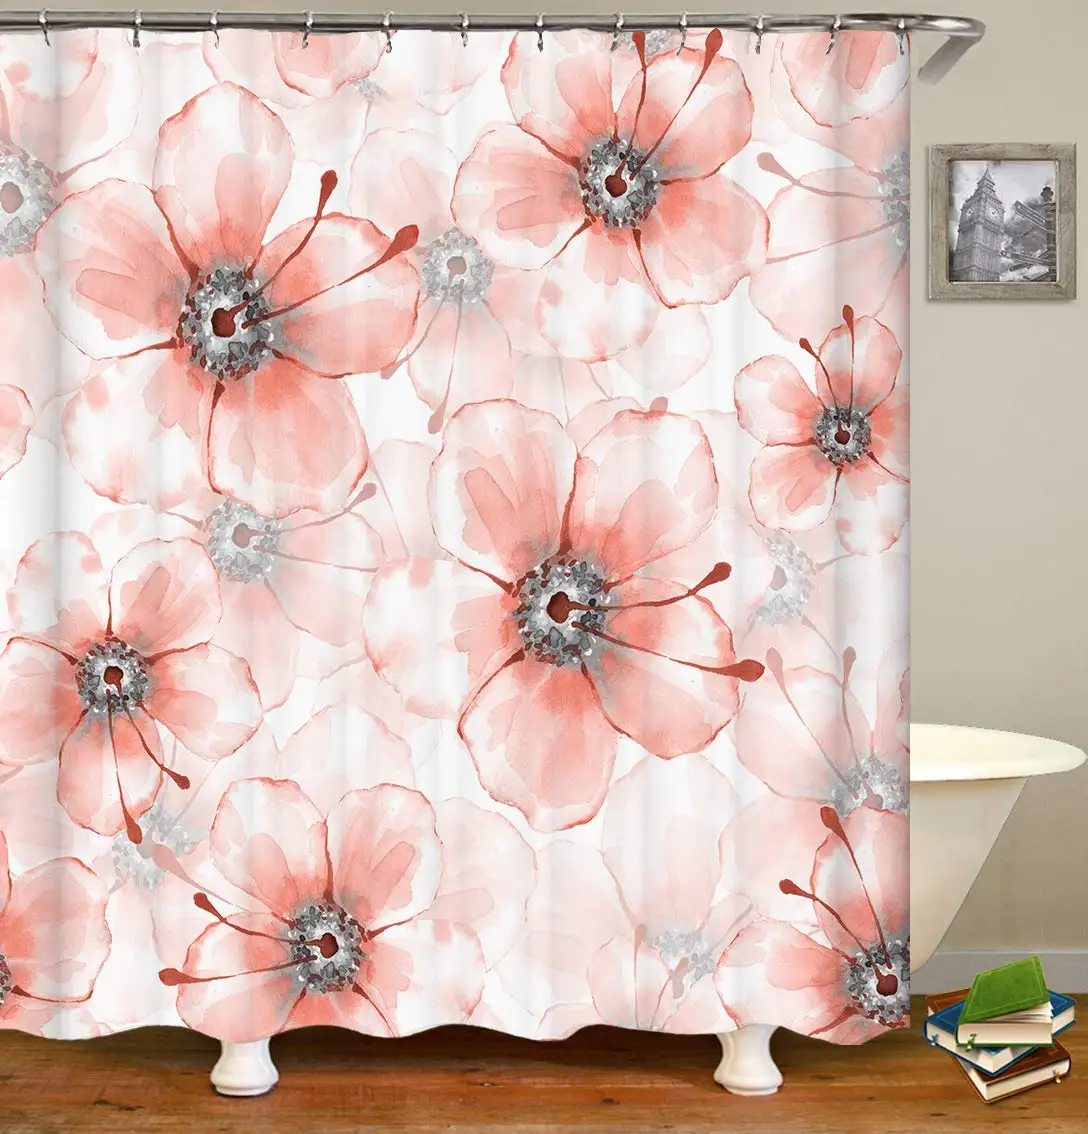 

HD Floral Pattern Watercolor Roses and Green Leaves Seamless Pattern Shower Curtain Set with Hooks Bathroom Decor Waterproof